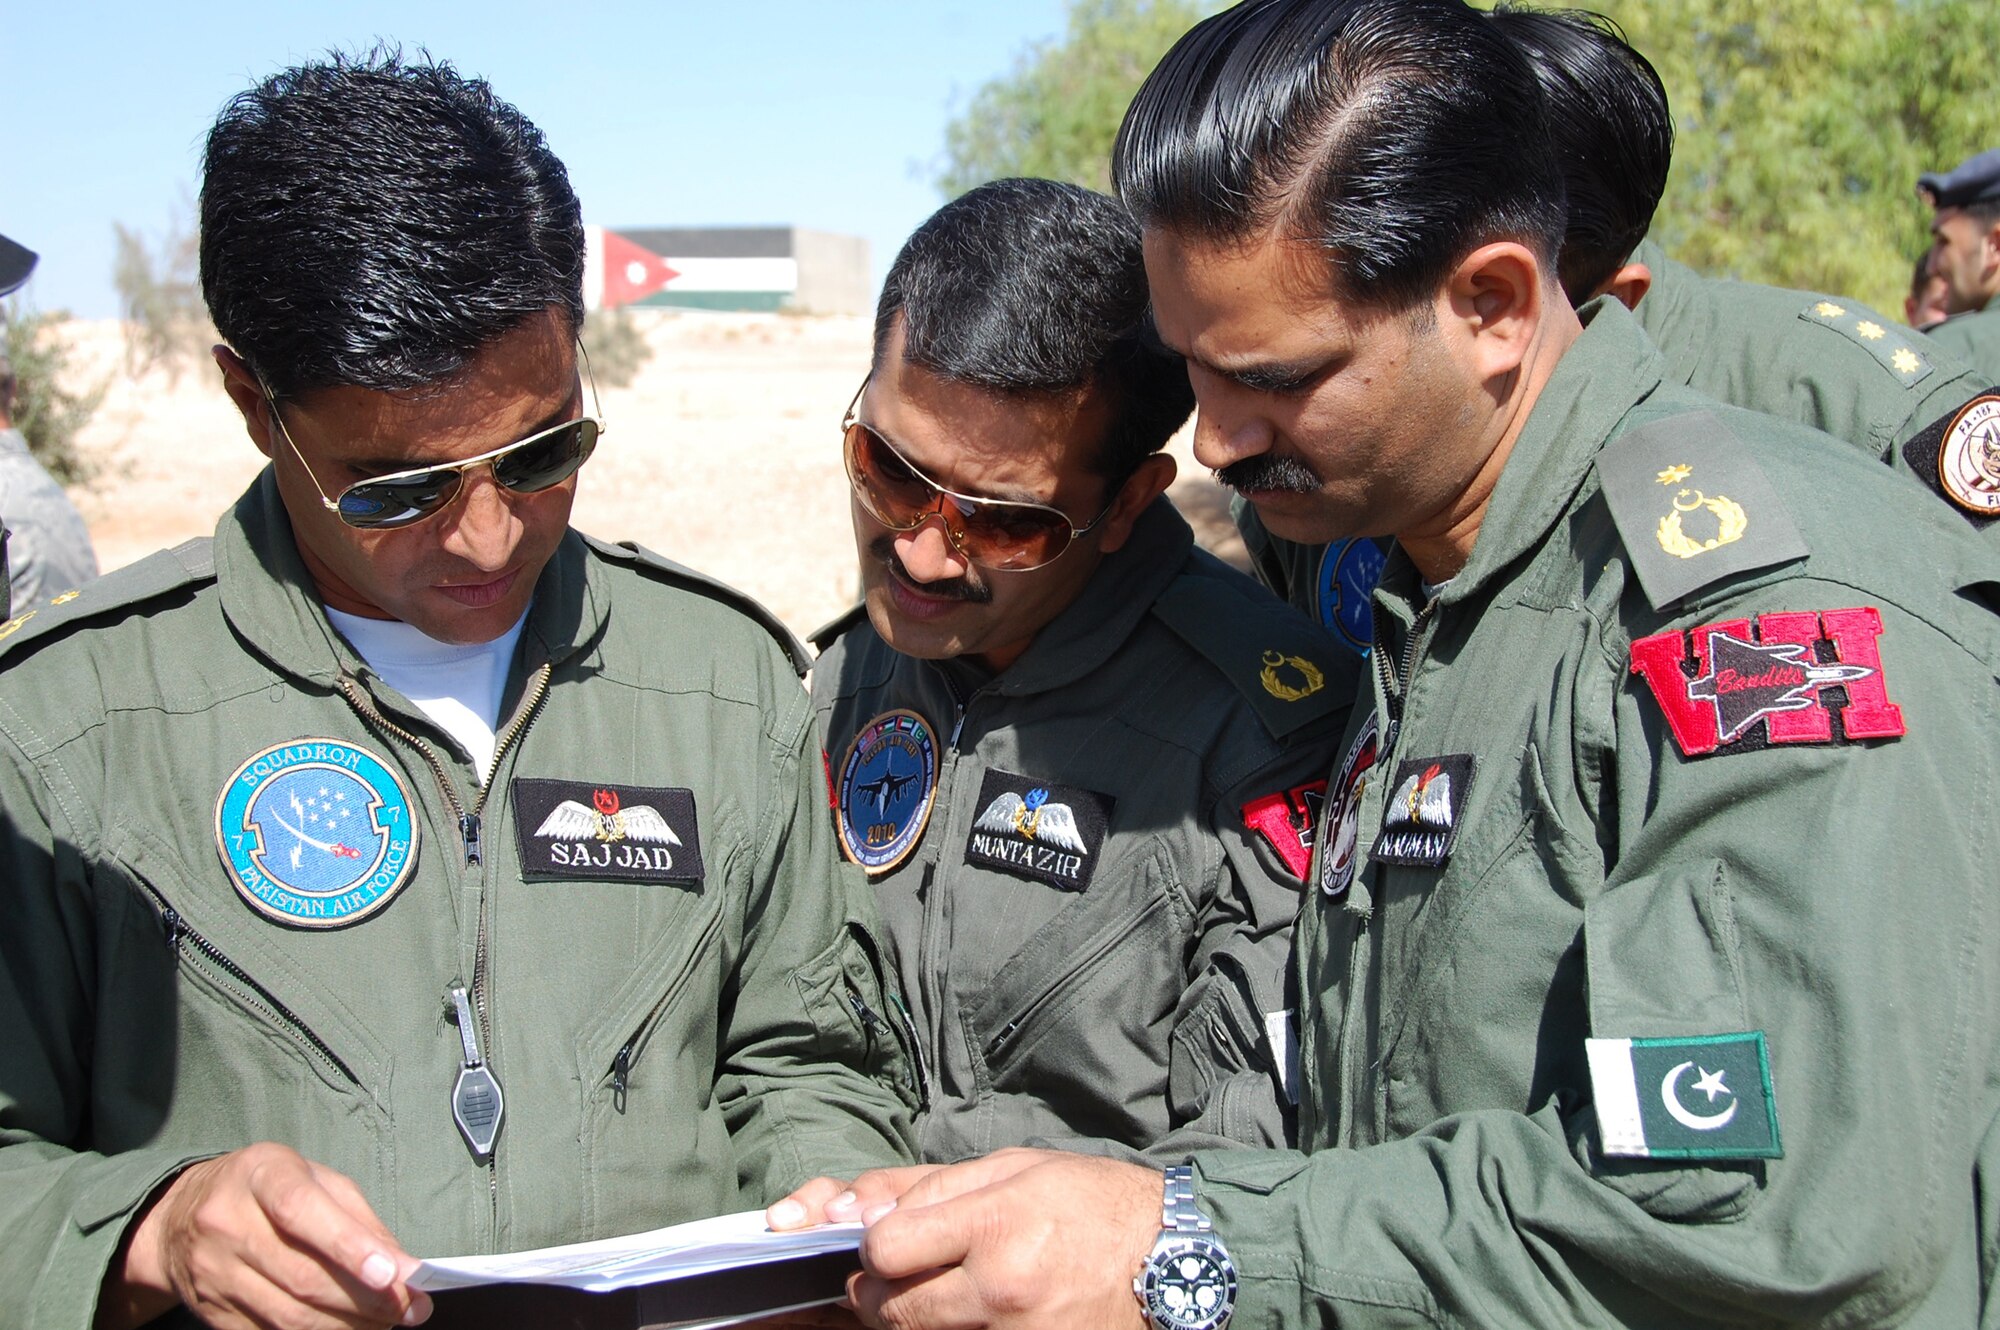 Pakistani contingent members discuss flight plans Nov. 2, 2010, after wrapping up Falcon Air Meet 2010 ceremonies in Azraq, Jordan. The air forces of Pakistan, Jordan, the U.S. and United Arab Emirates competed in the annual two week event in Jordan hosted by the Royal Jordanian Air Force. The overall winners of the competition were the members of the Royal Jordanian Air Force team. (U.S. Air Force photo/Alan Black)